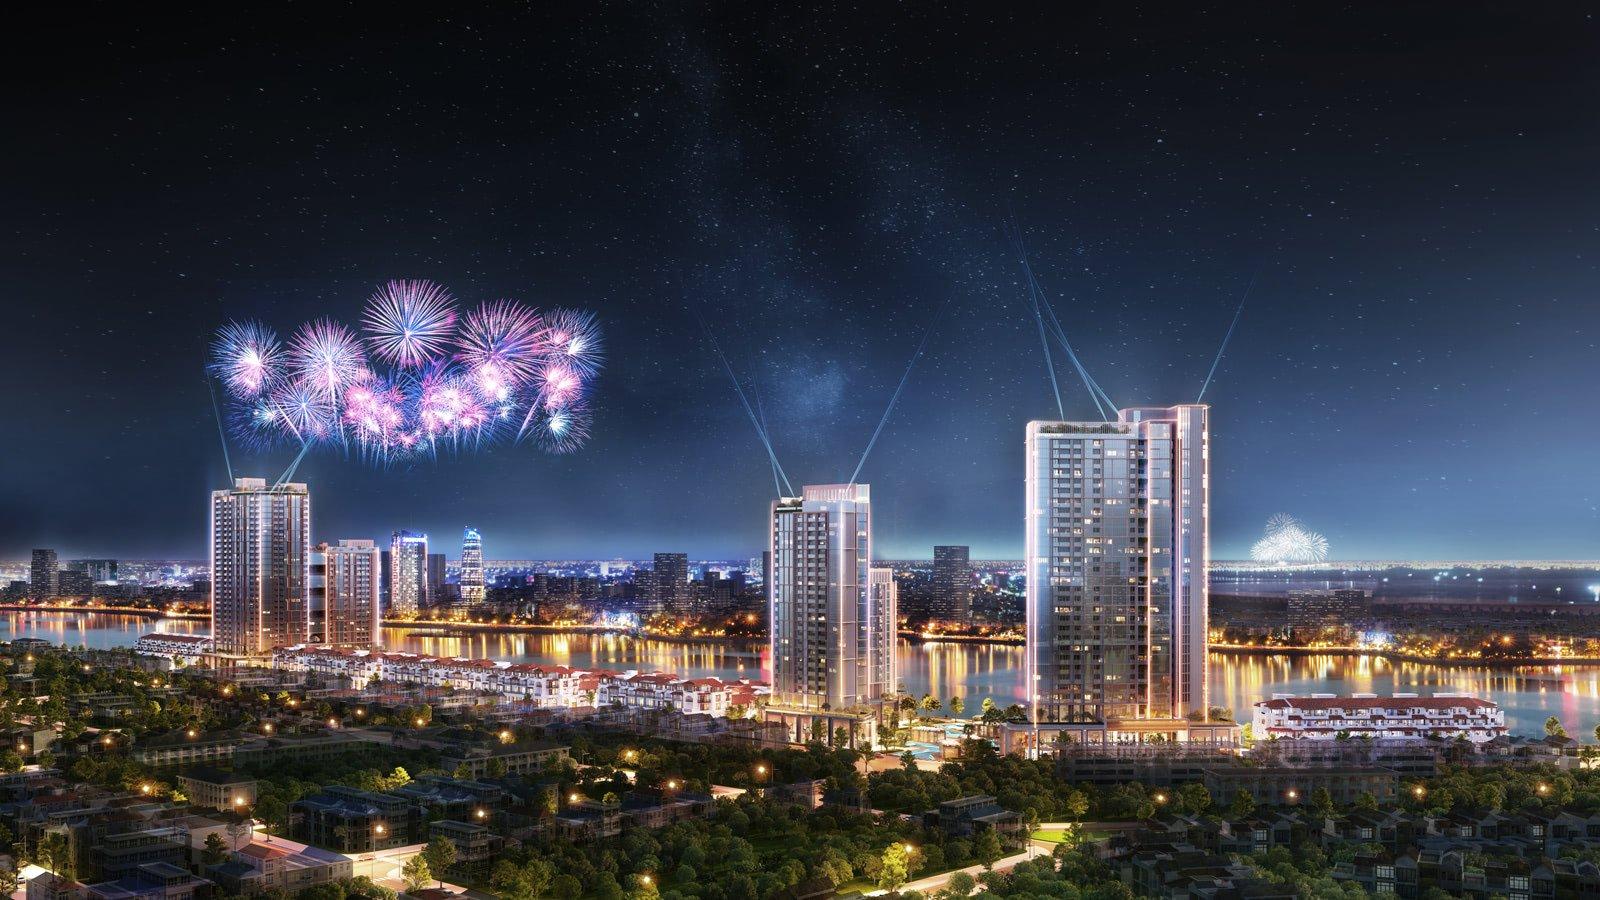 Sun Group announced the launching of new project - Sun Symphony Residence